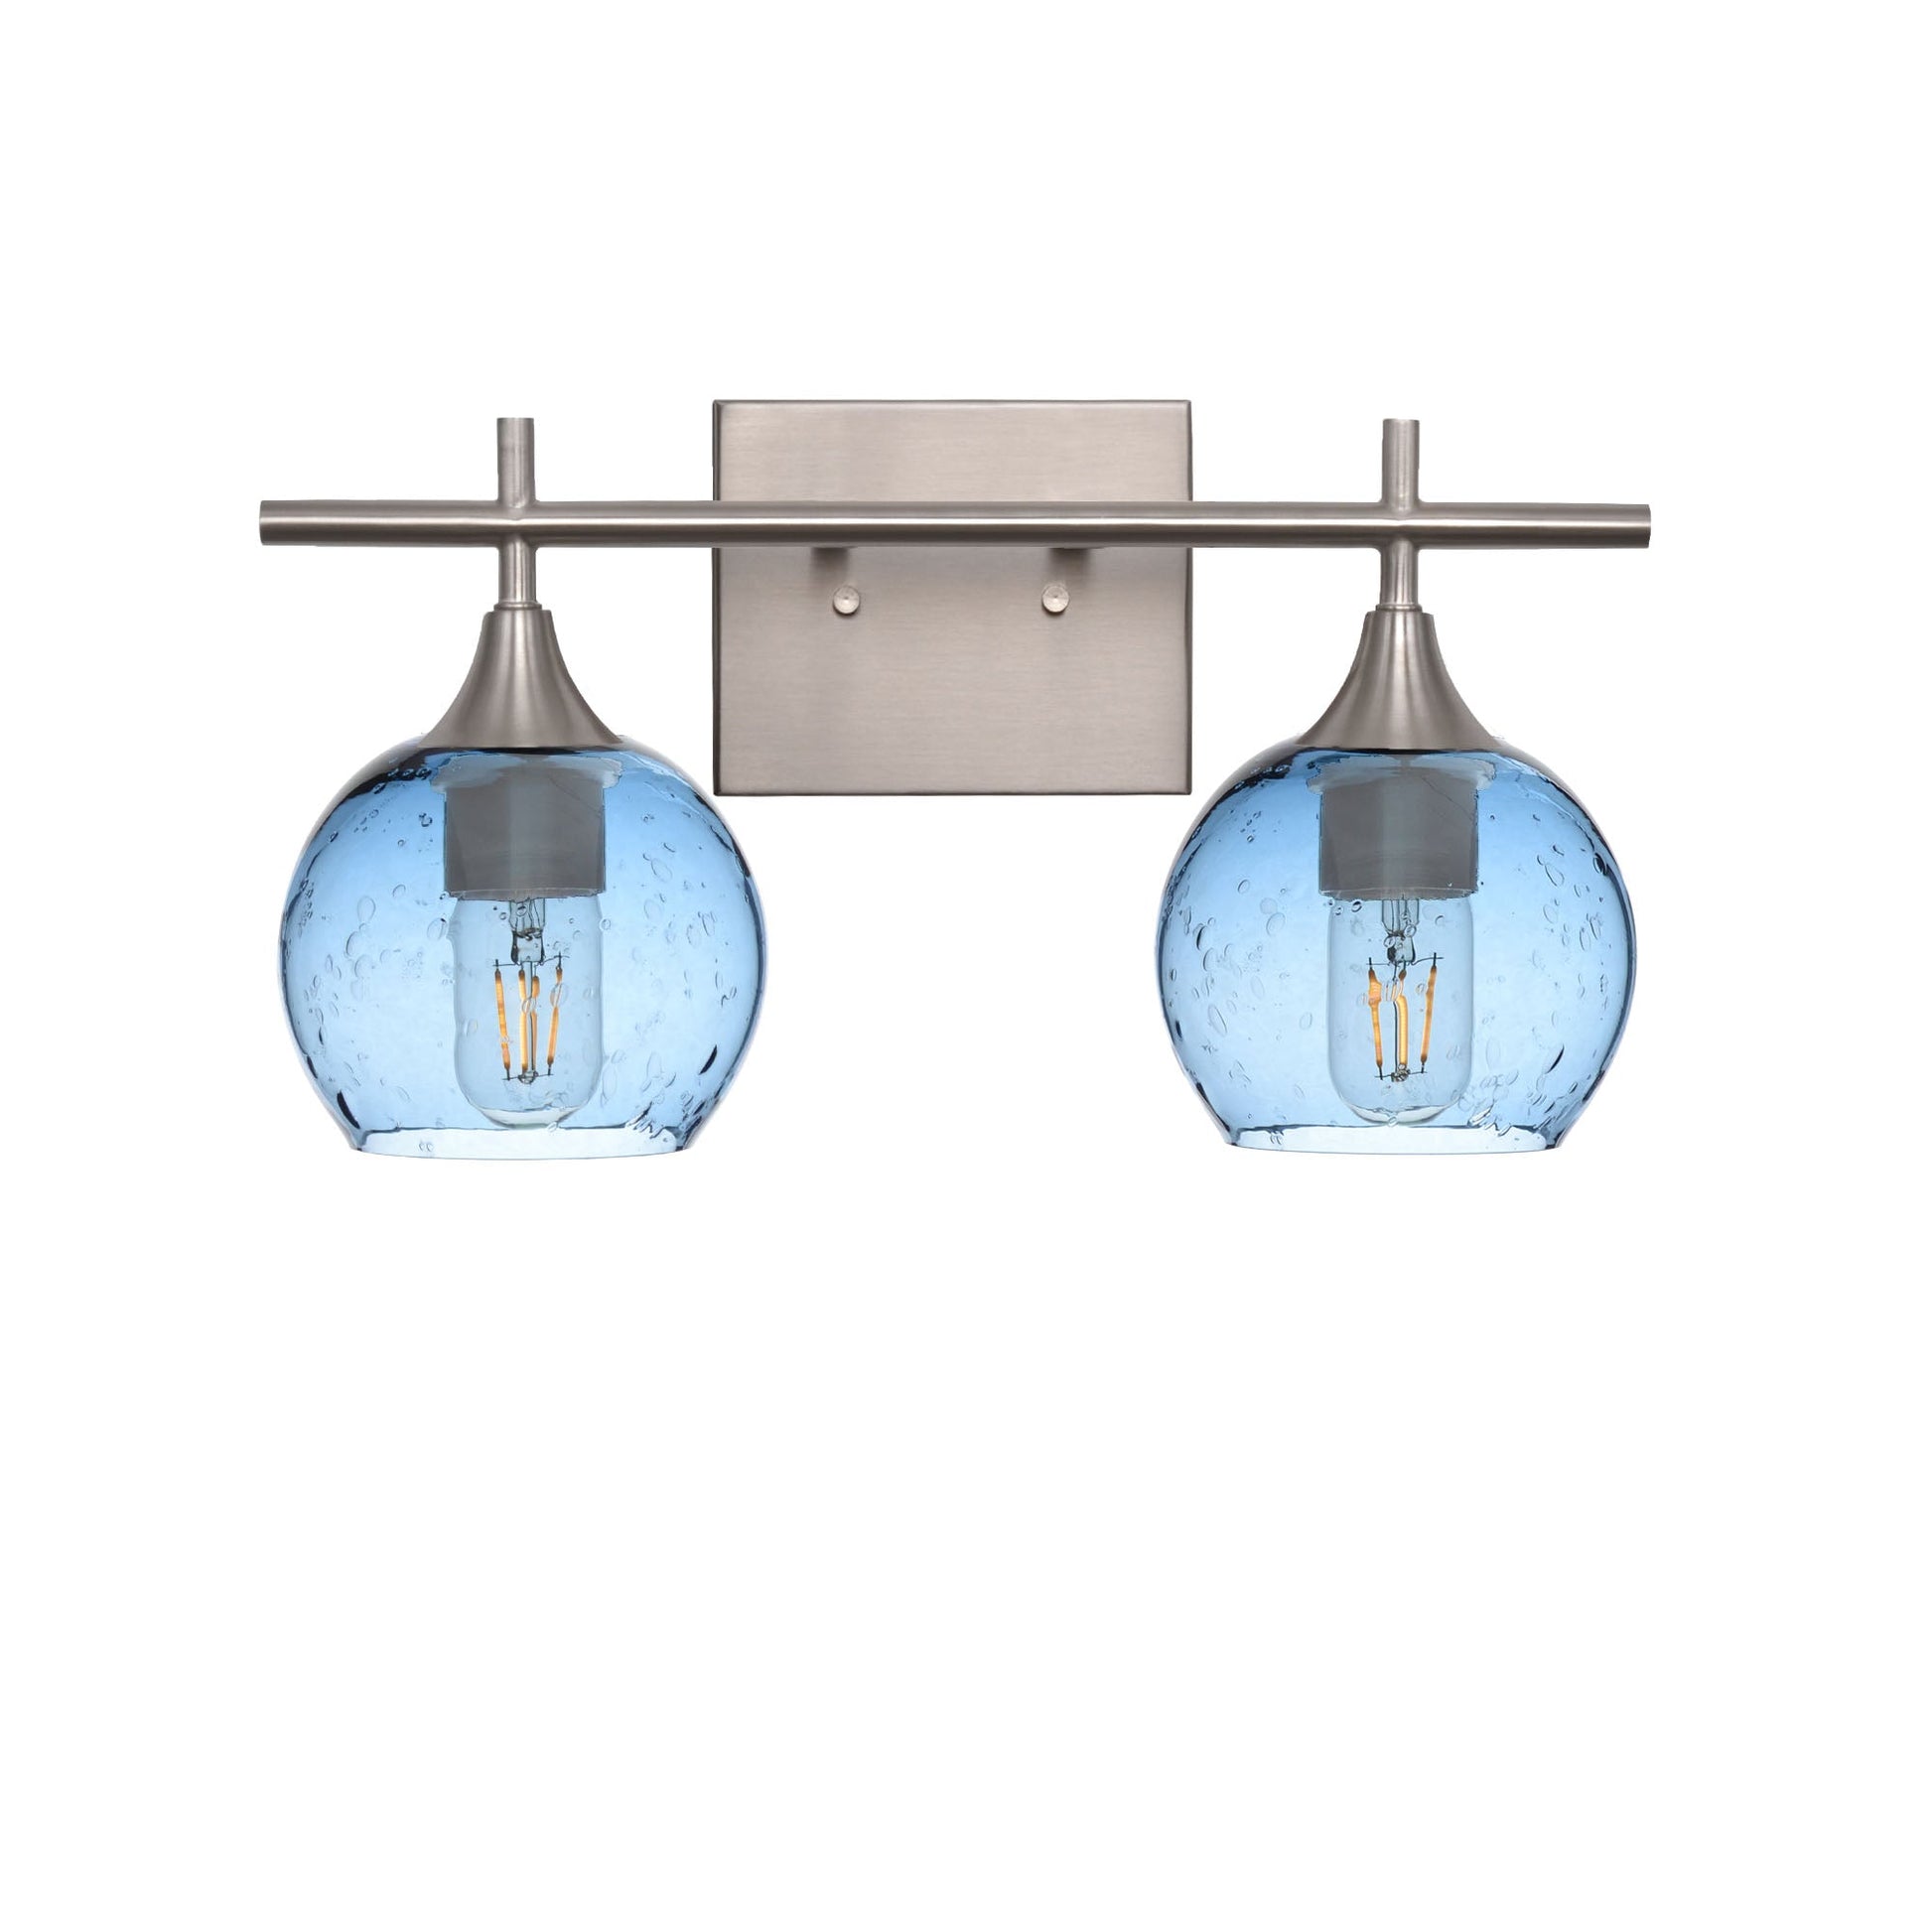 763 Lunar: 2 Light Wall Vanity-Glass-Bicycle Glass Co - Hotshop-Steel Blue-Brushed Nickel-Bicycle Glass Co